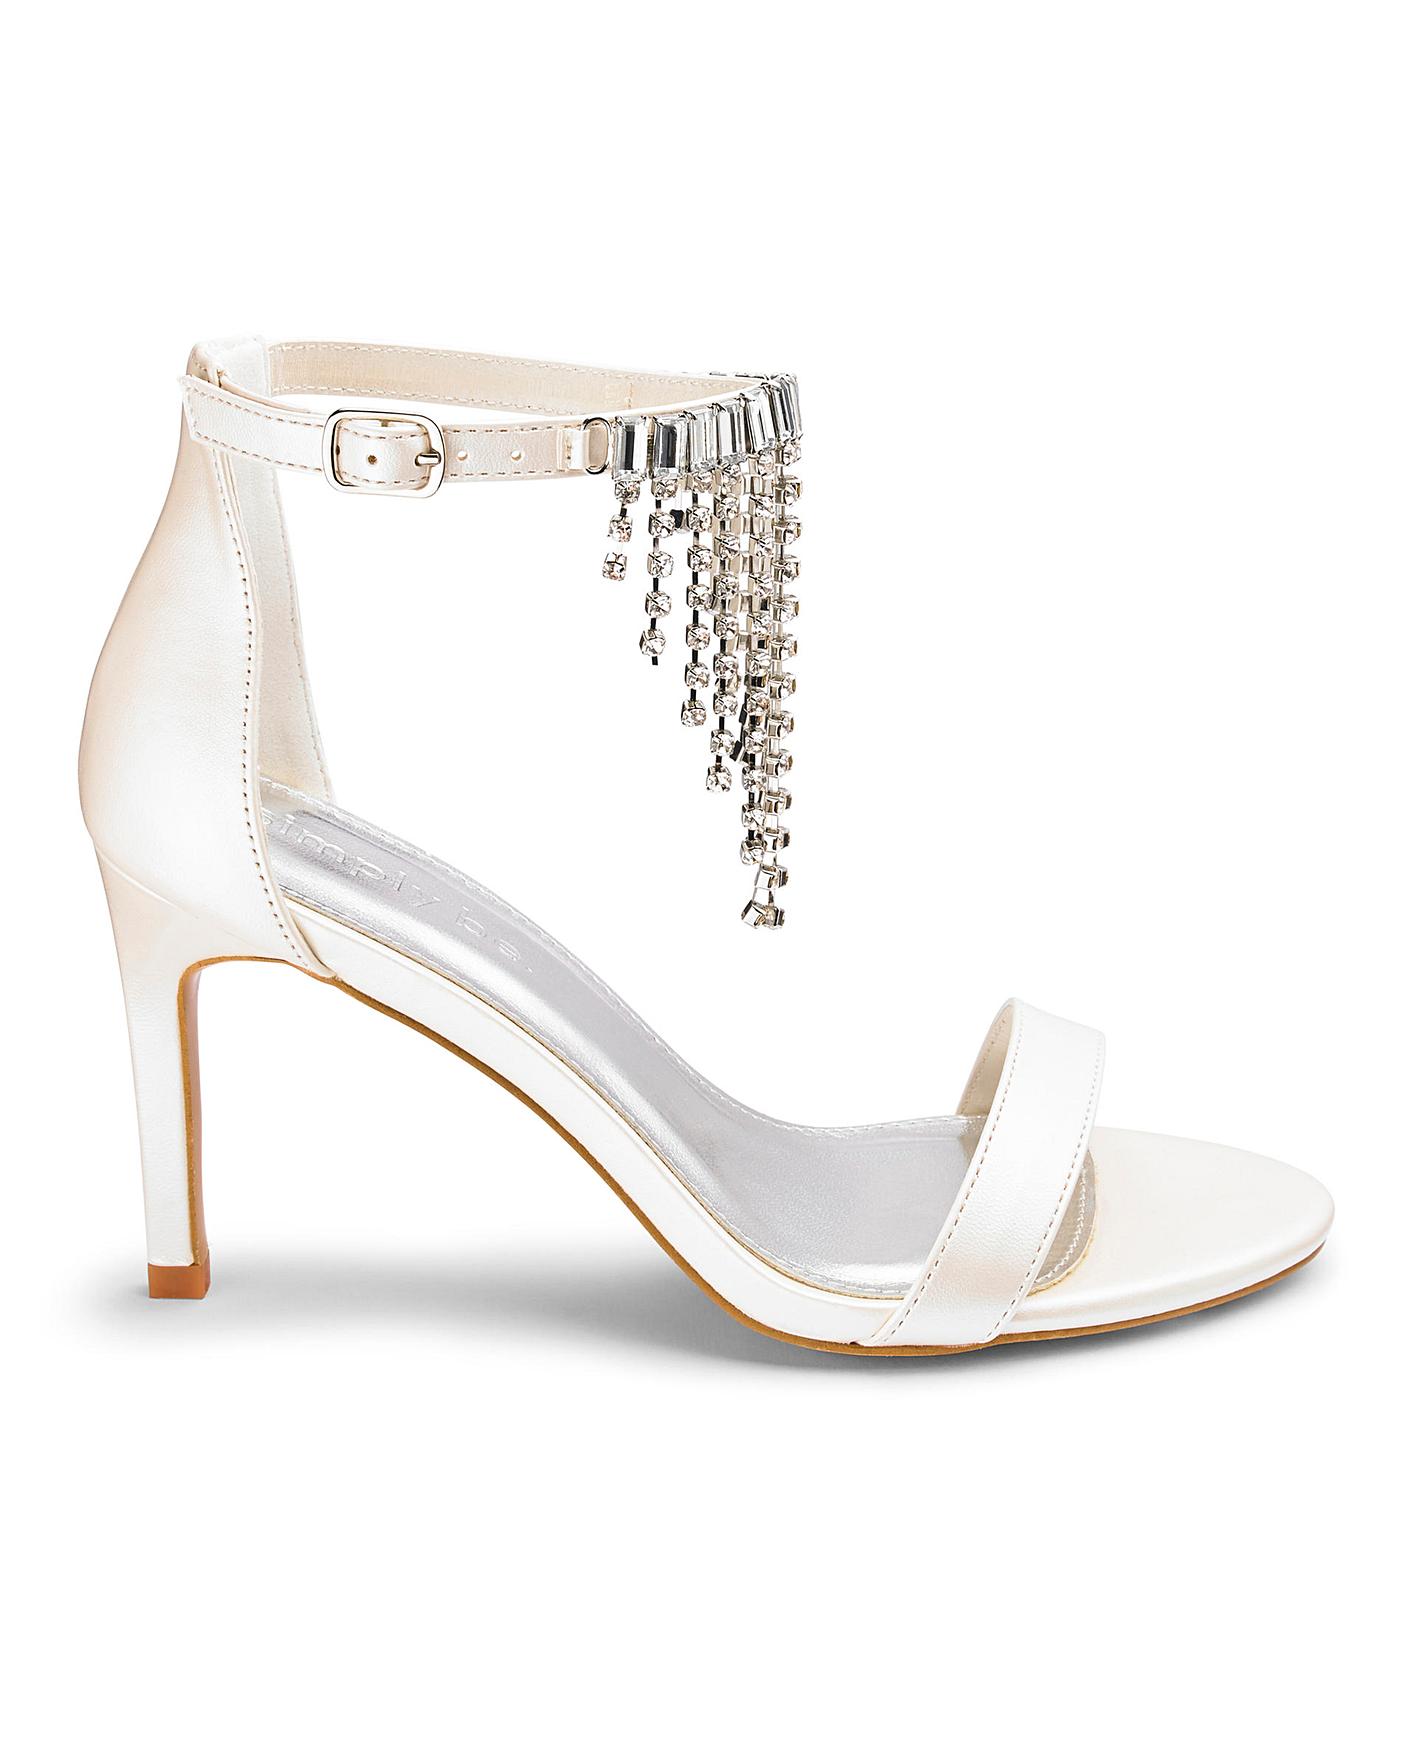 eee fit bridal shoes